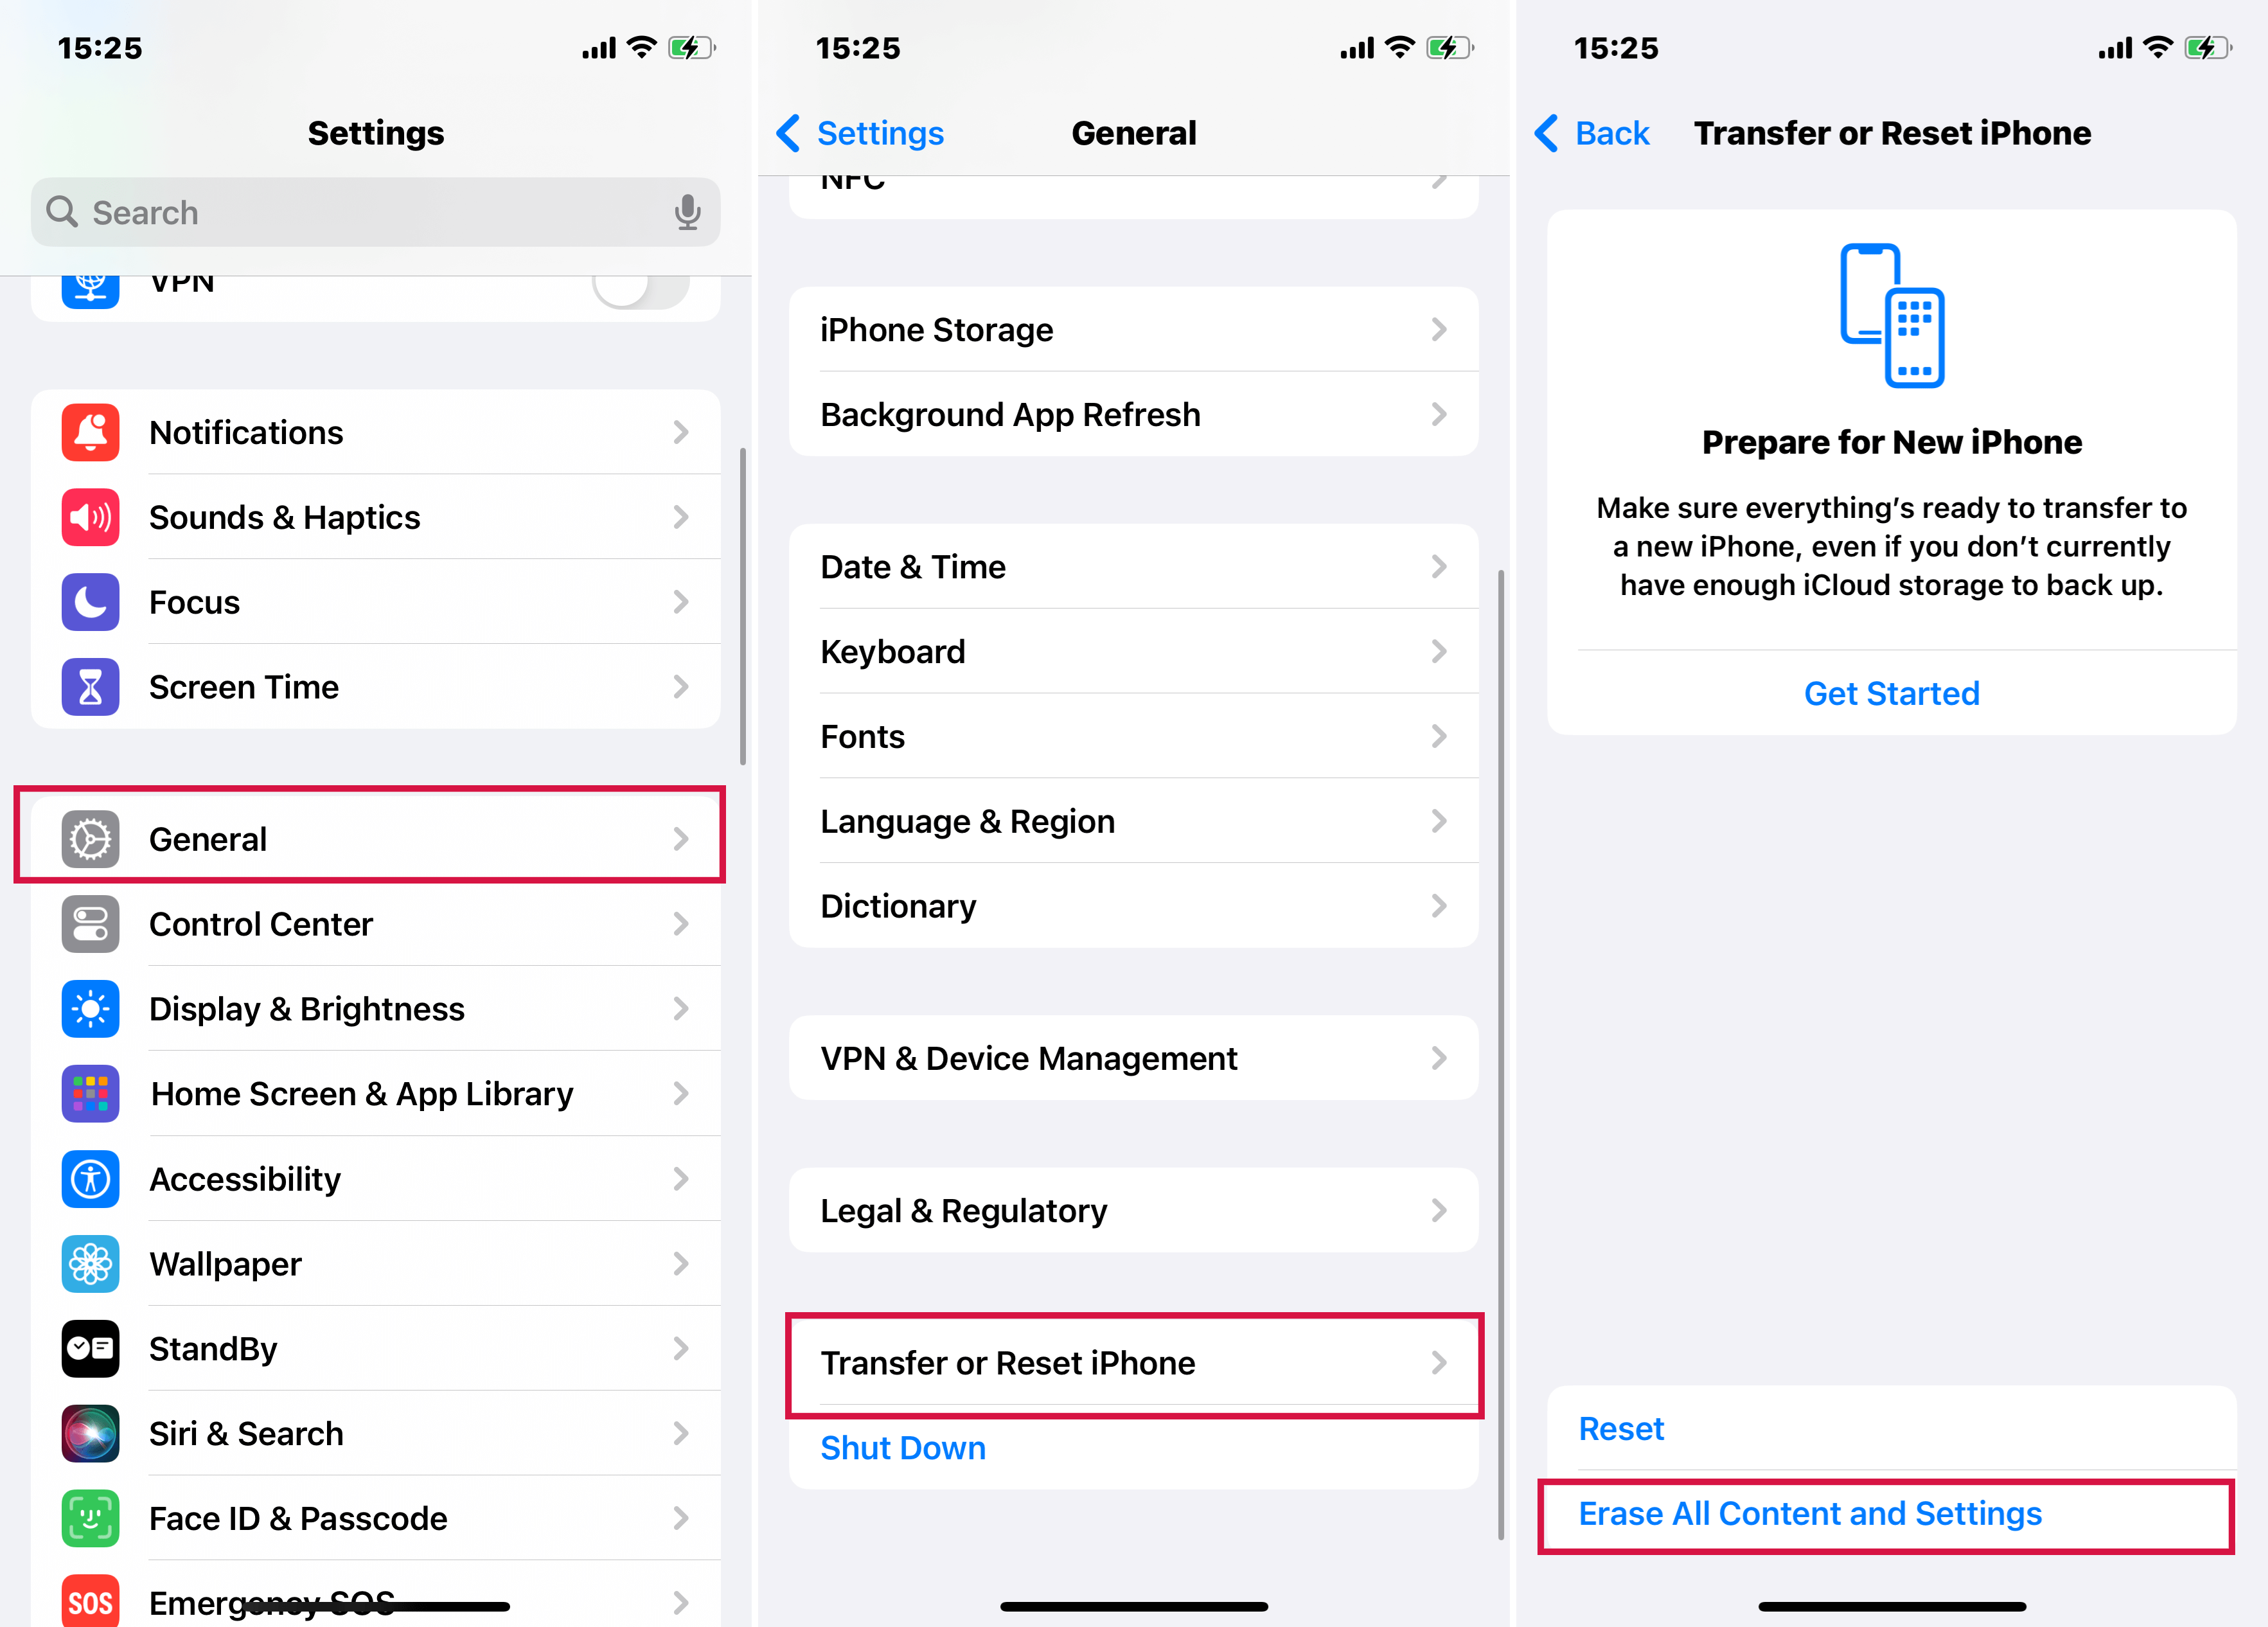 New Iphone Erase All Content And Settings